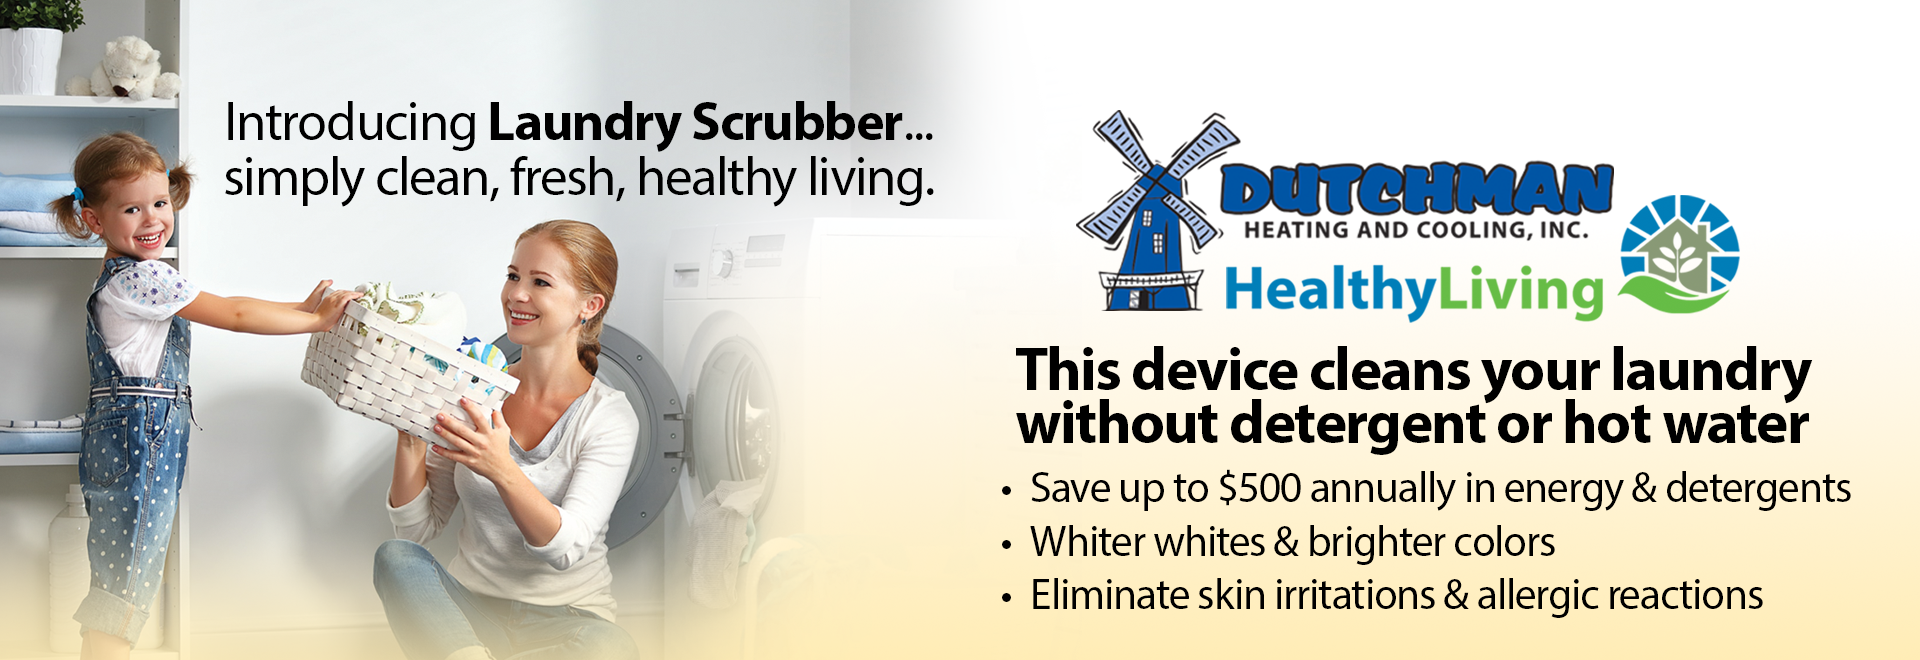 Laundry Scruber cleans your laundry with out detergent or hot water